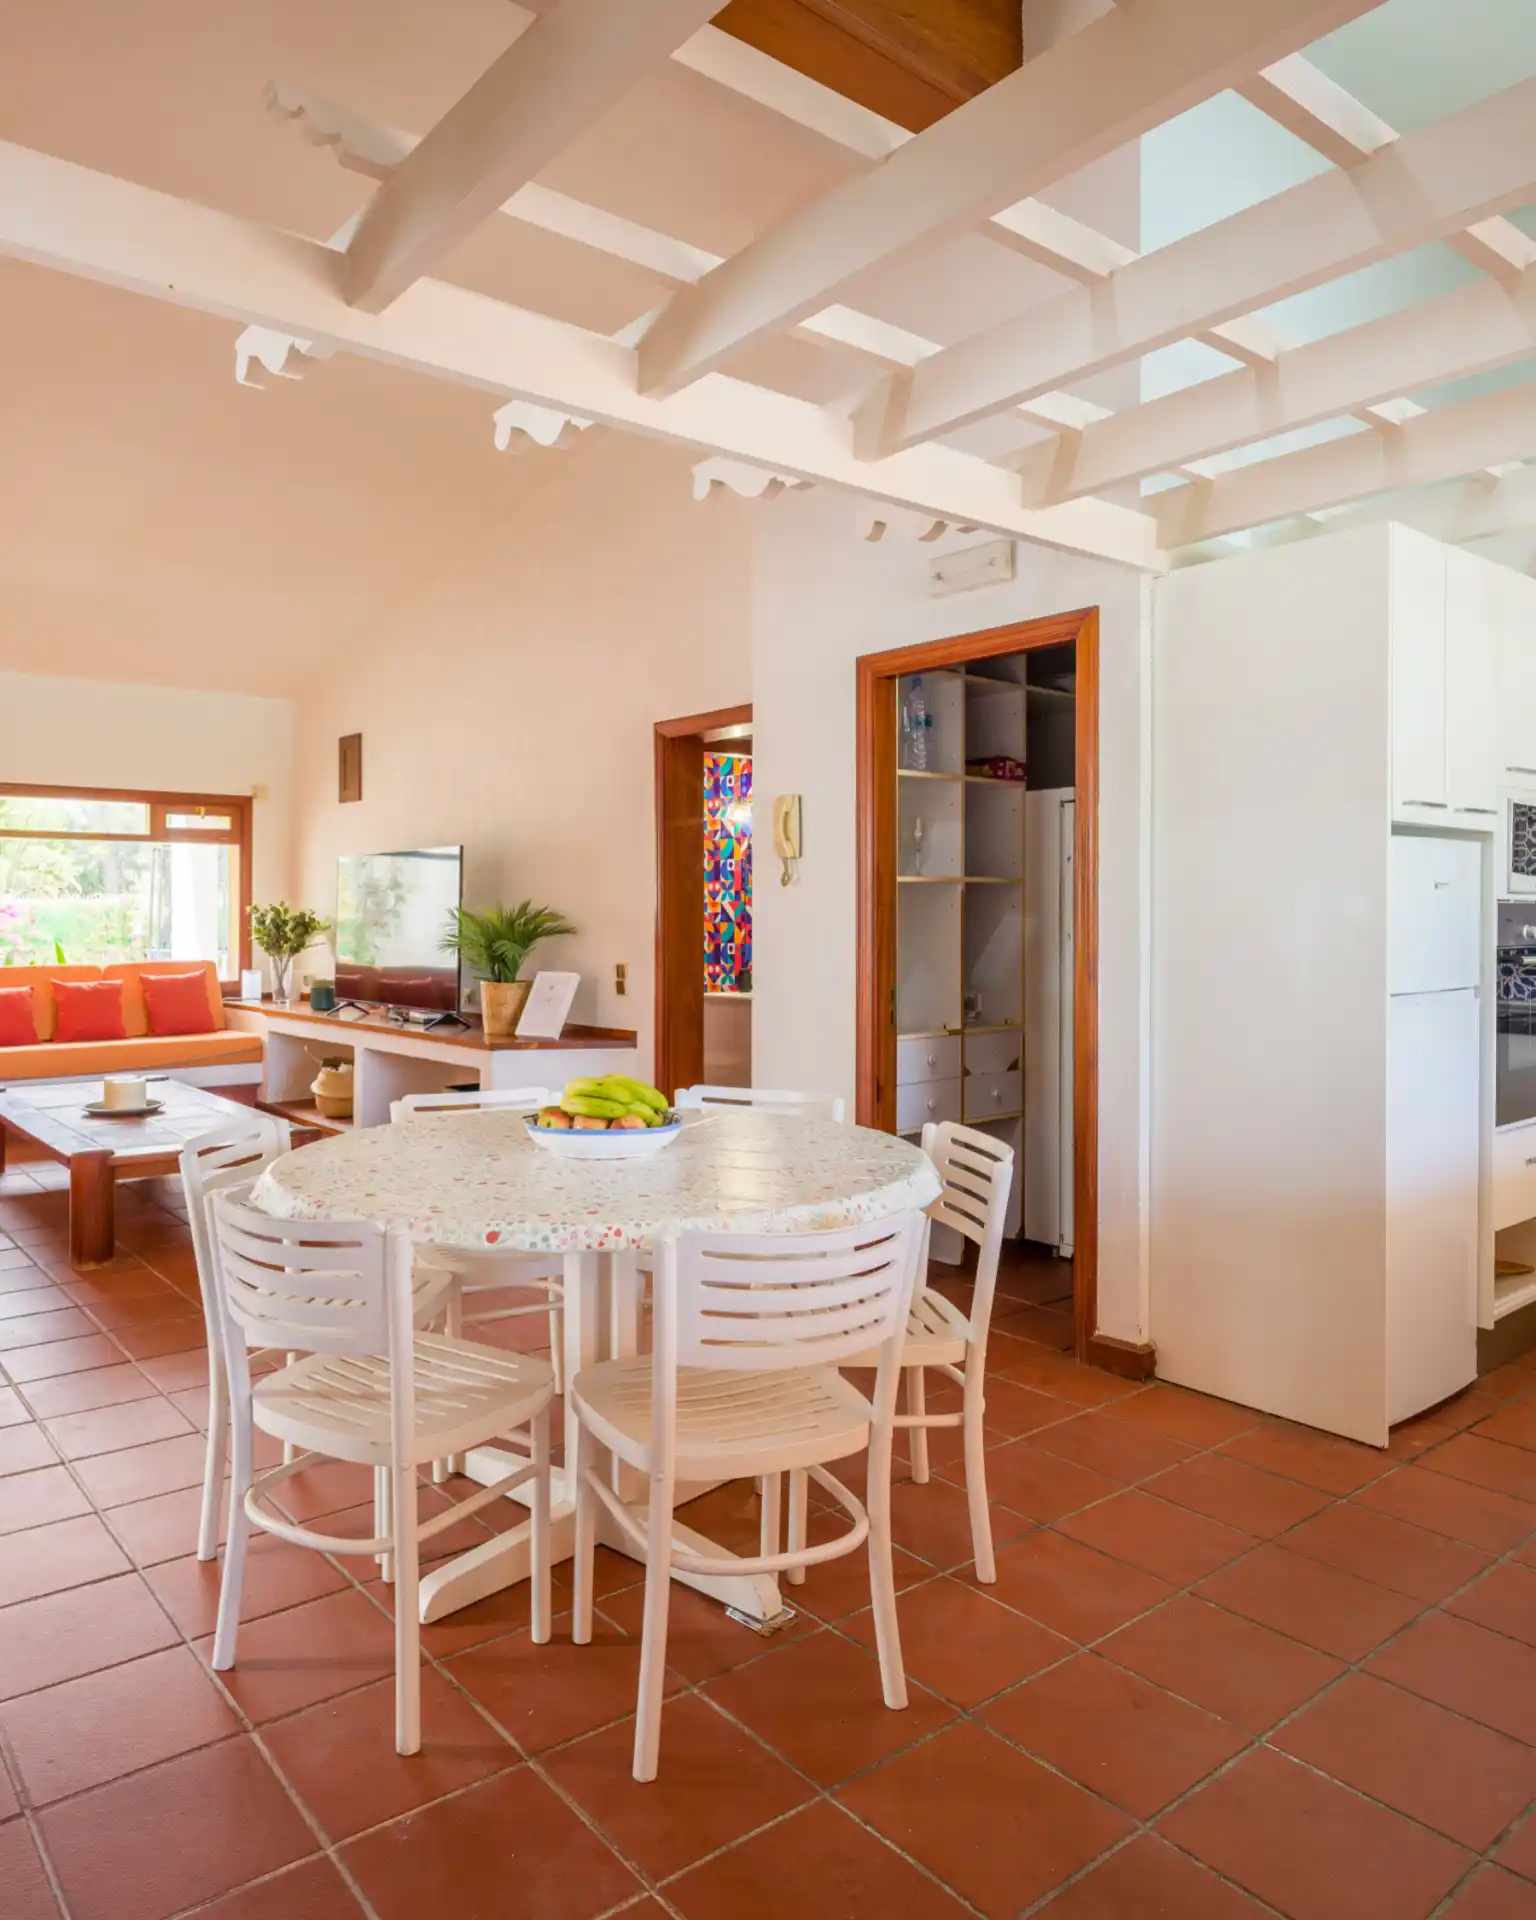 Kitchen and living room in a family home in Gran Canaria